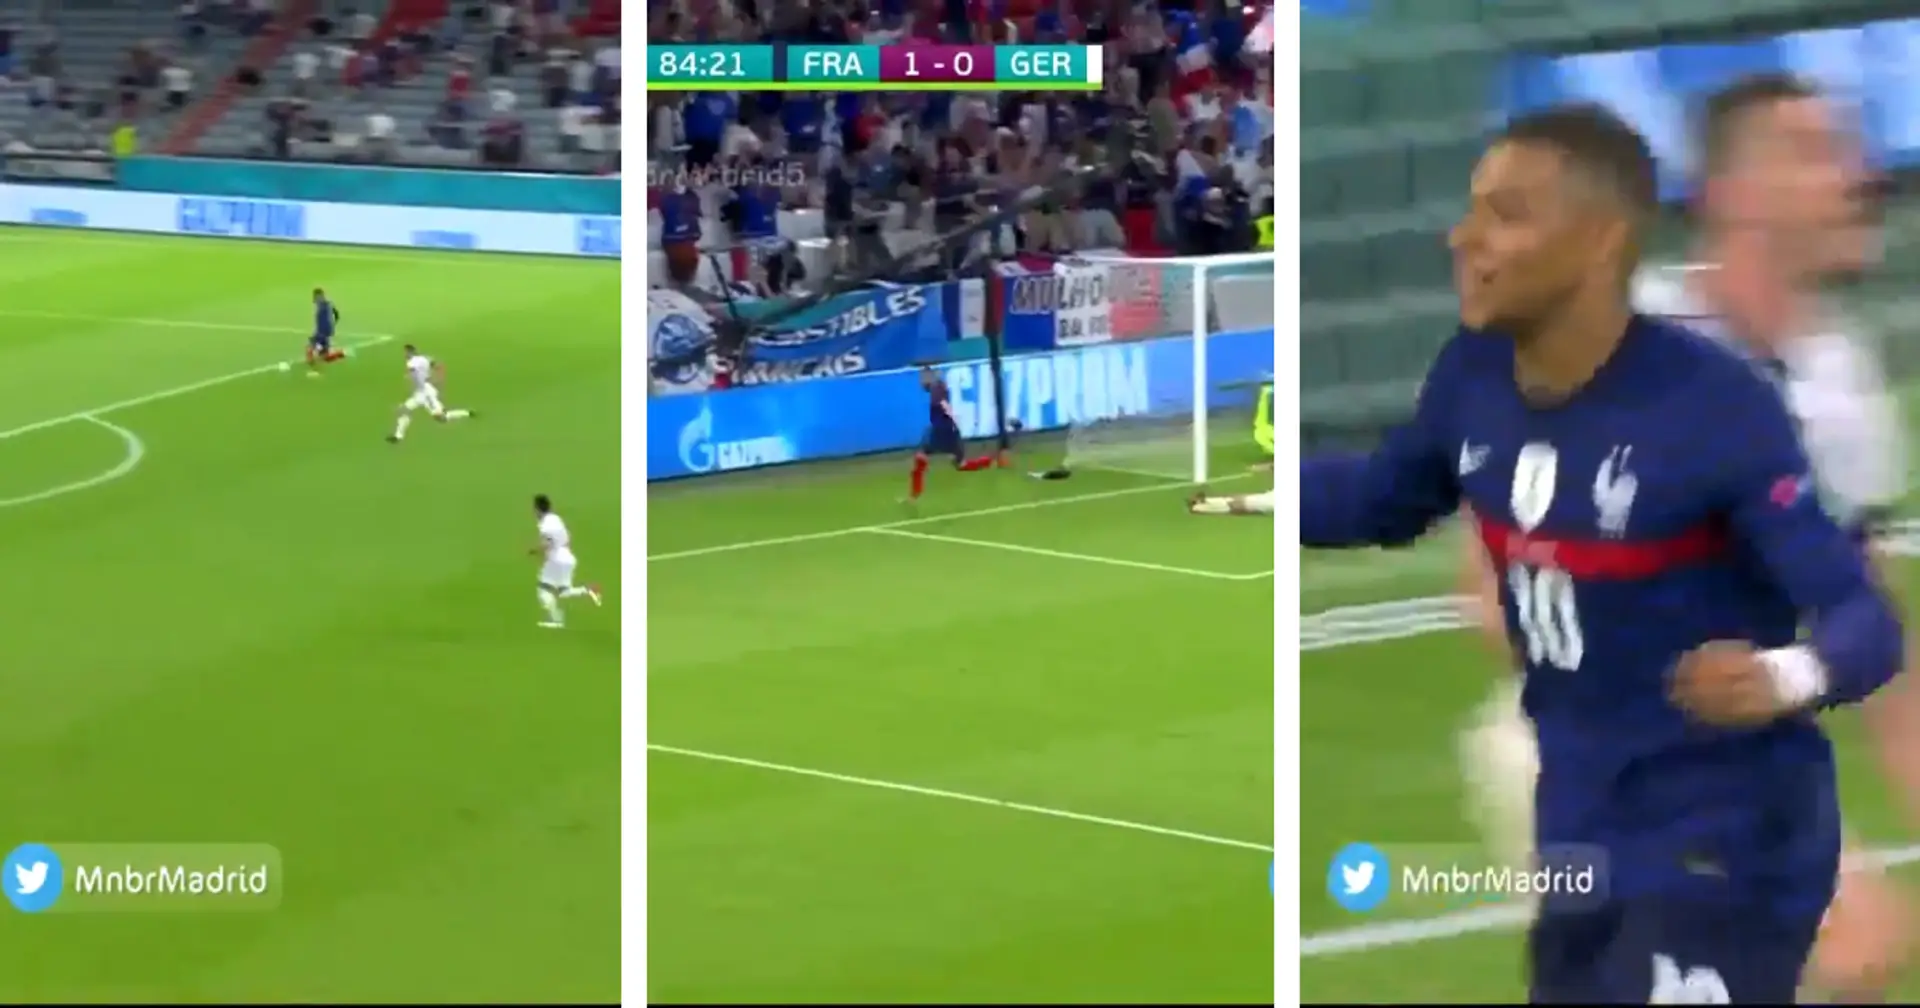 Mbappe sets up Benzema's first goal after France return — but it's ruled out for offside